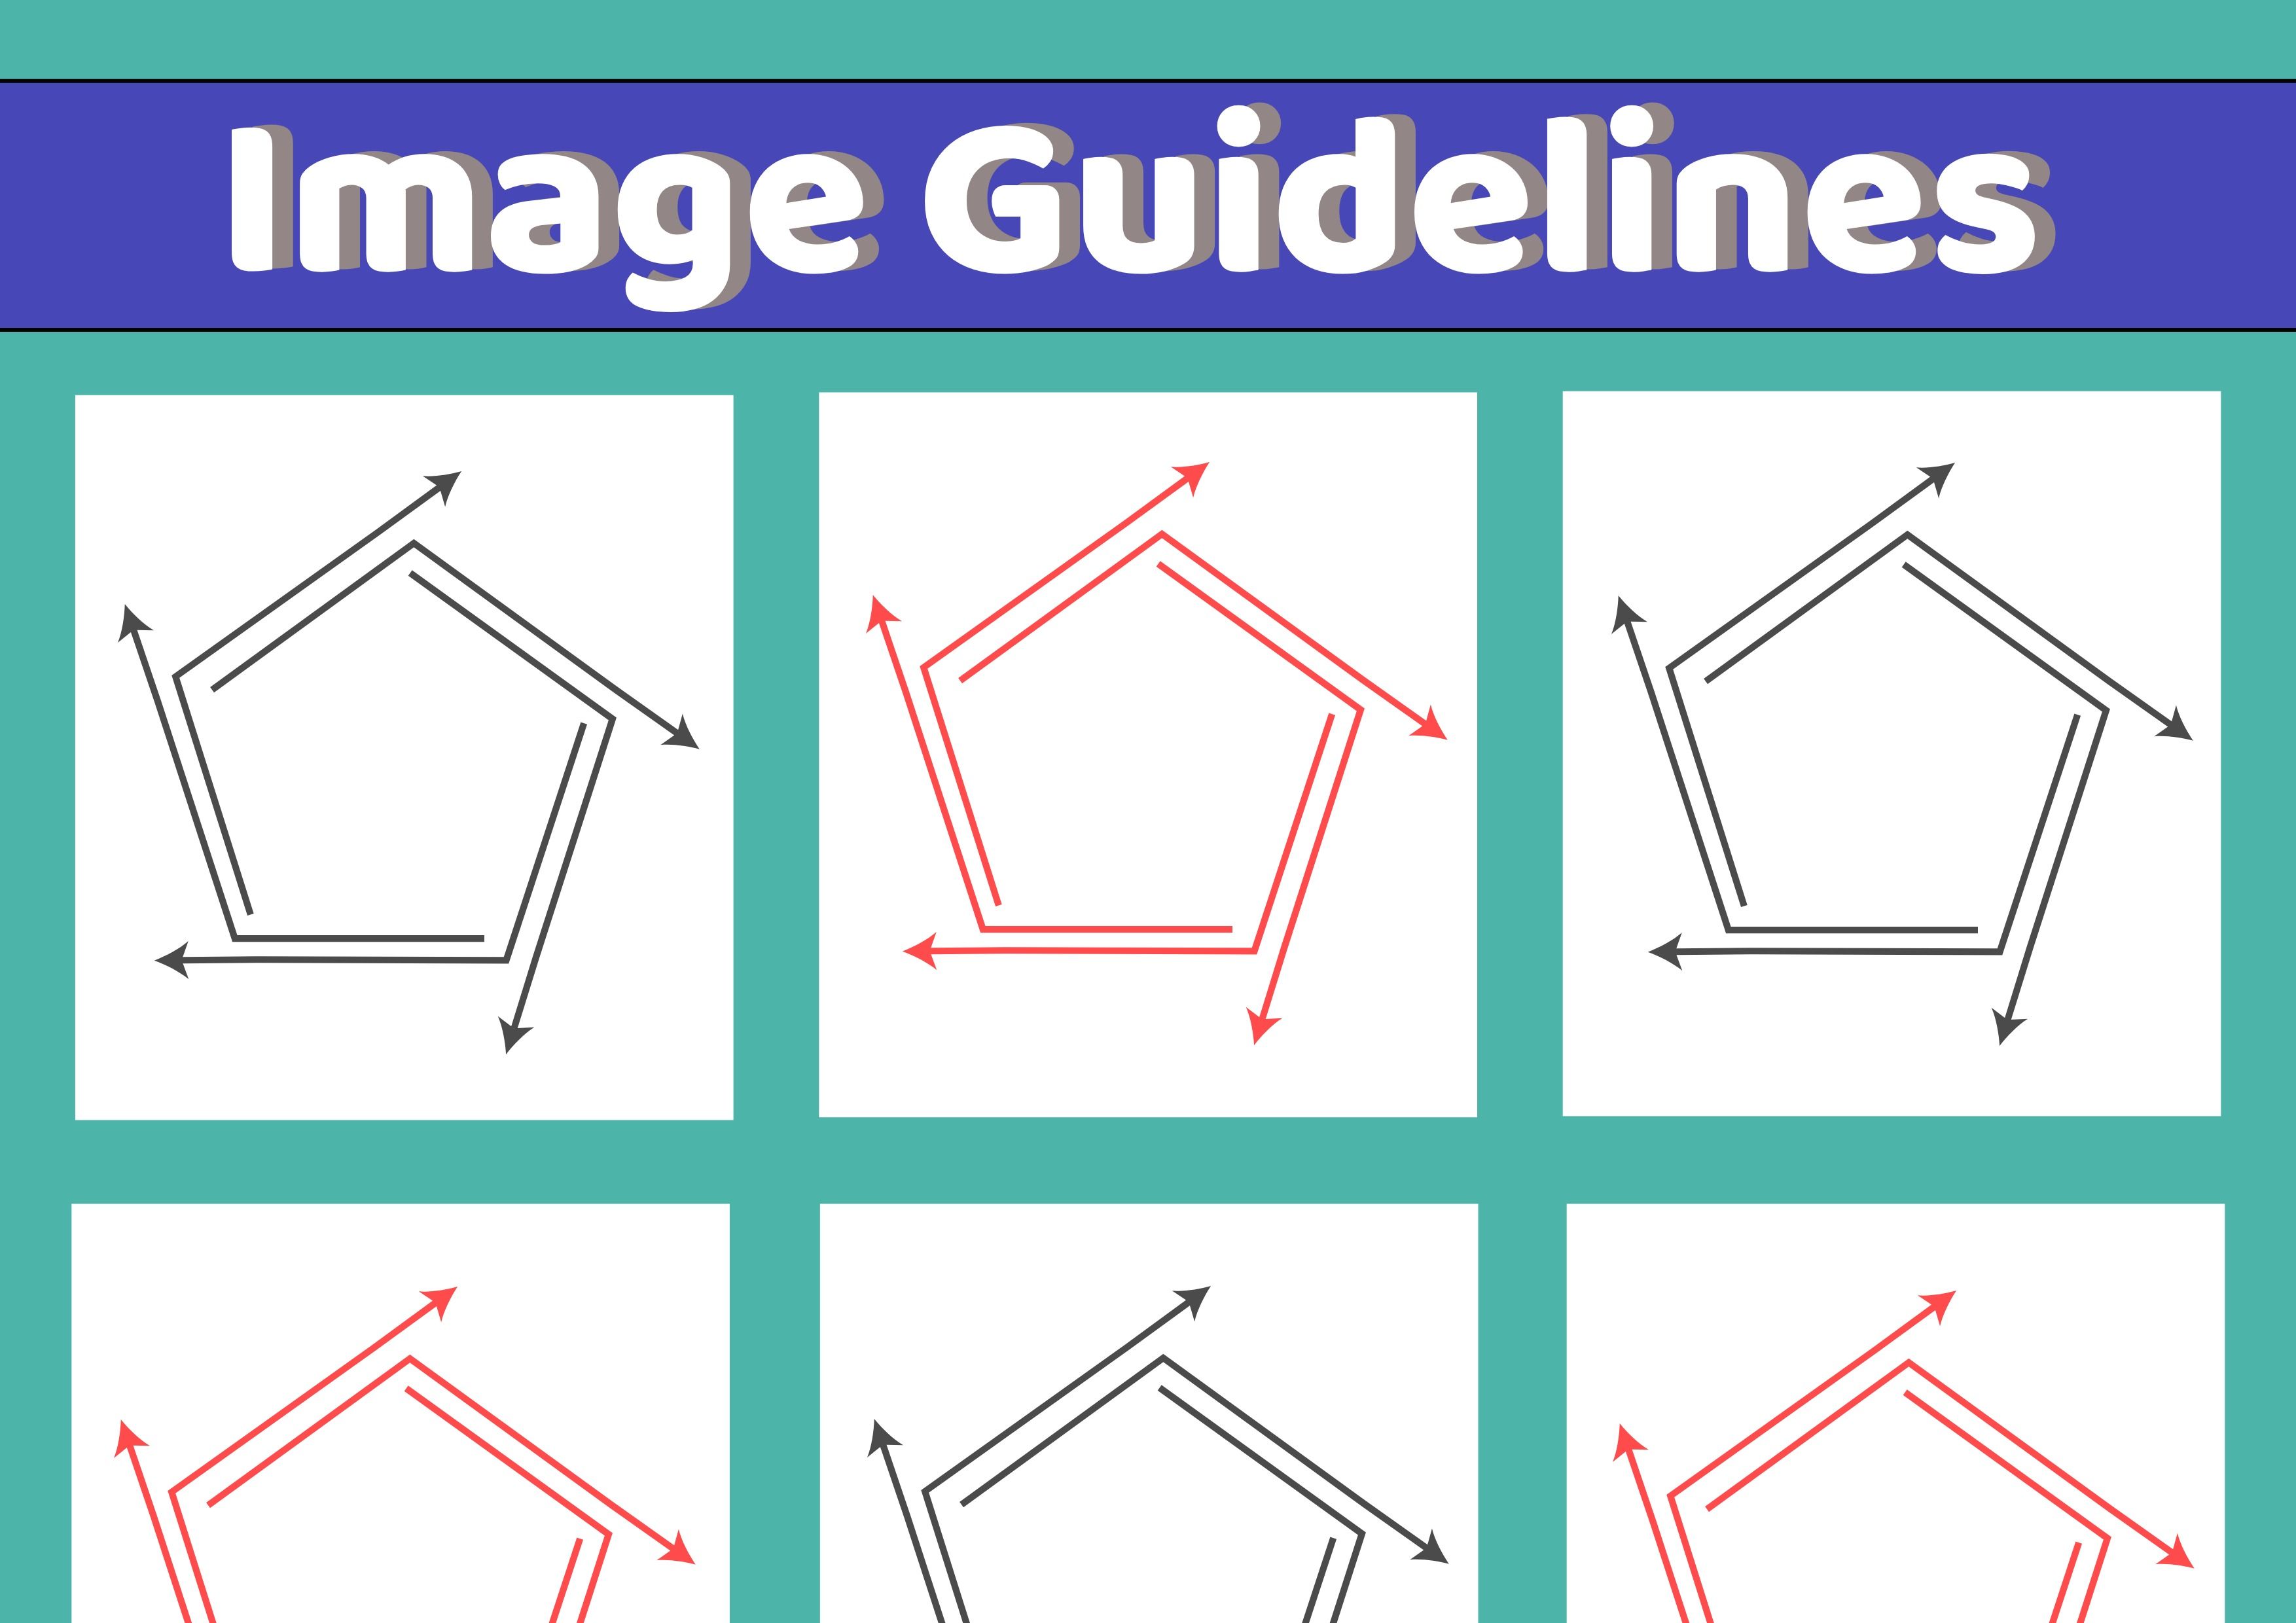 Image guidelines image with 6 photo templates and arrow icons on each - Tips on how to create image guidelines - Image